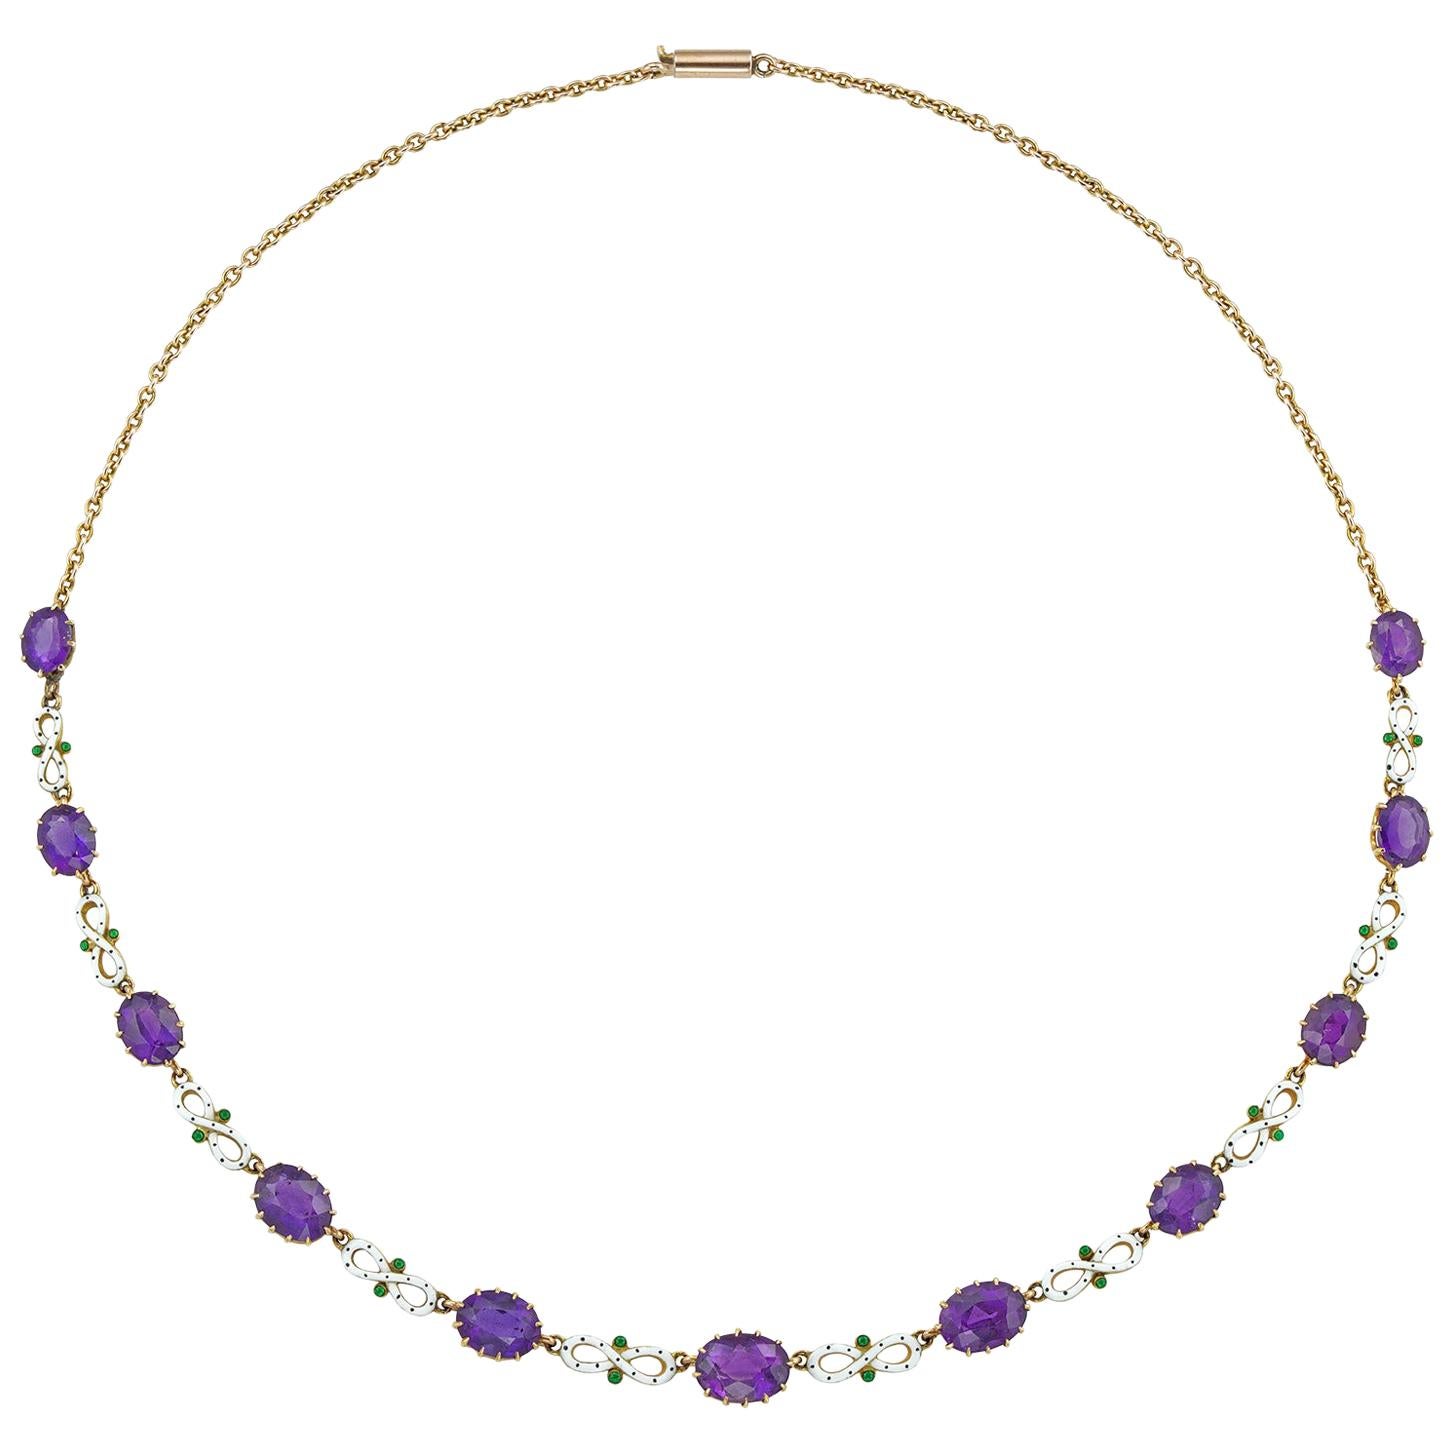 Suffragette Amethyst and Enamel Necklace